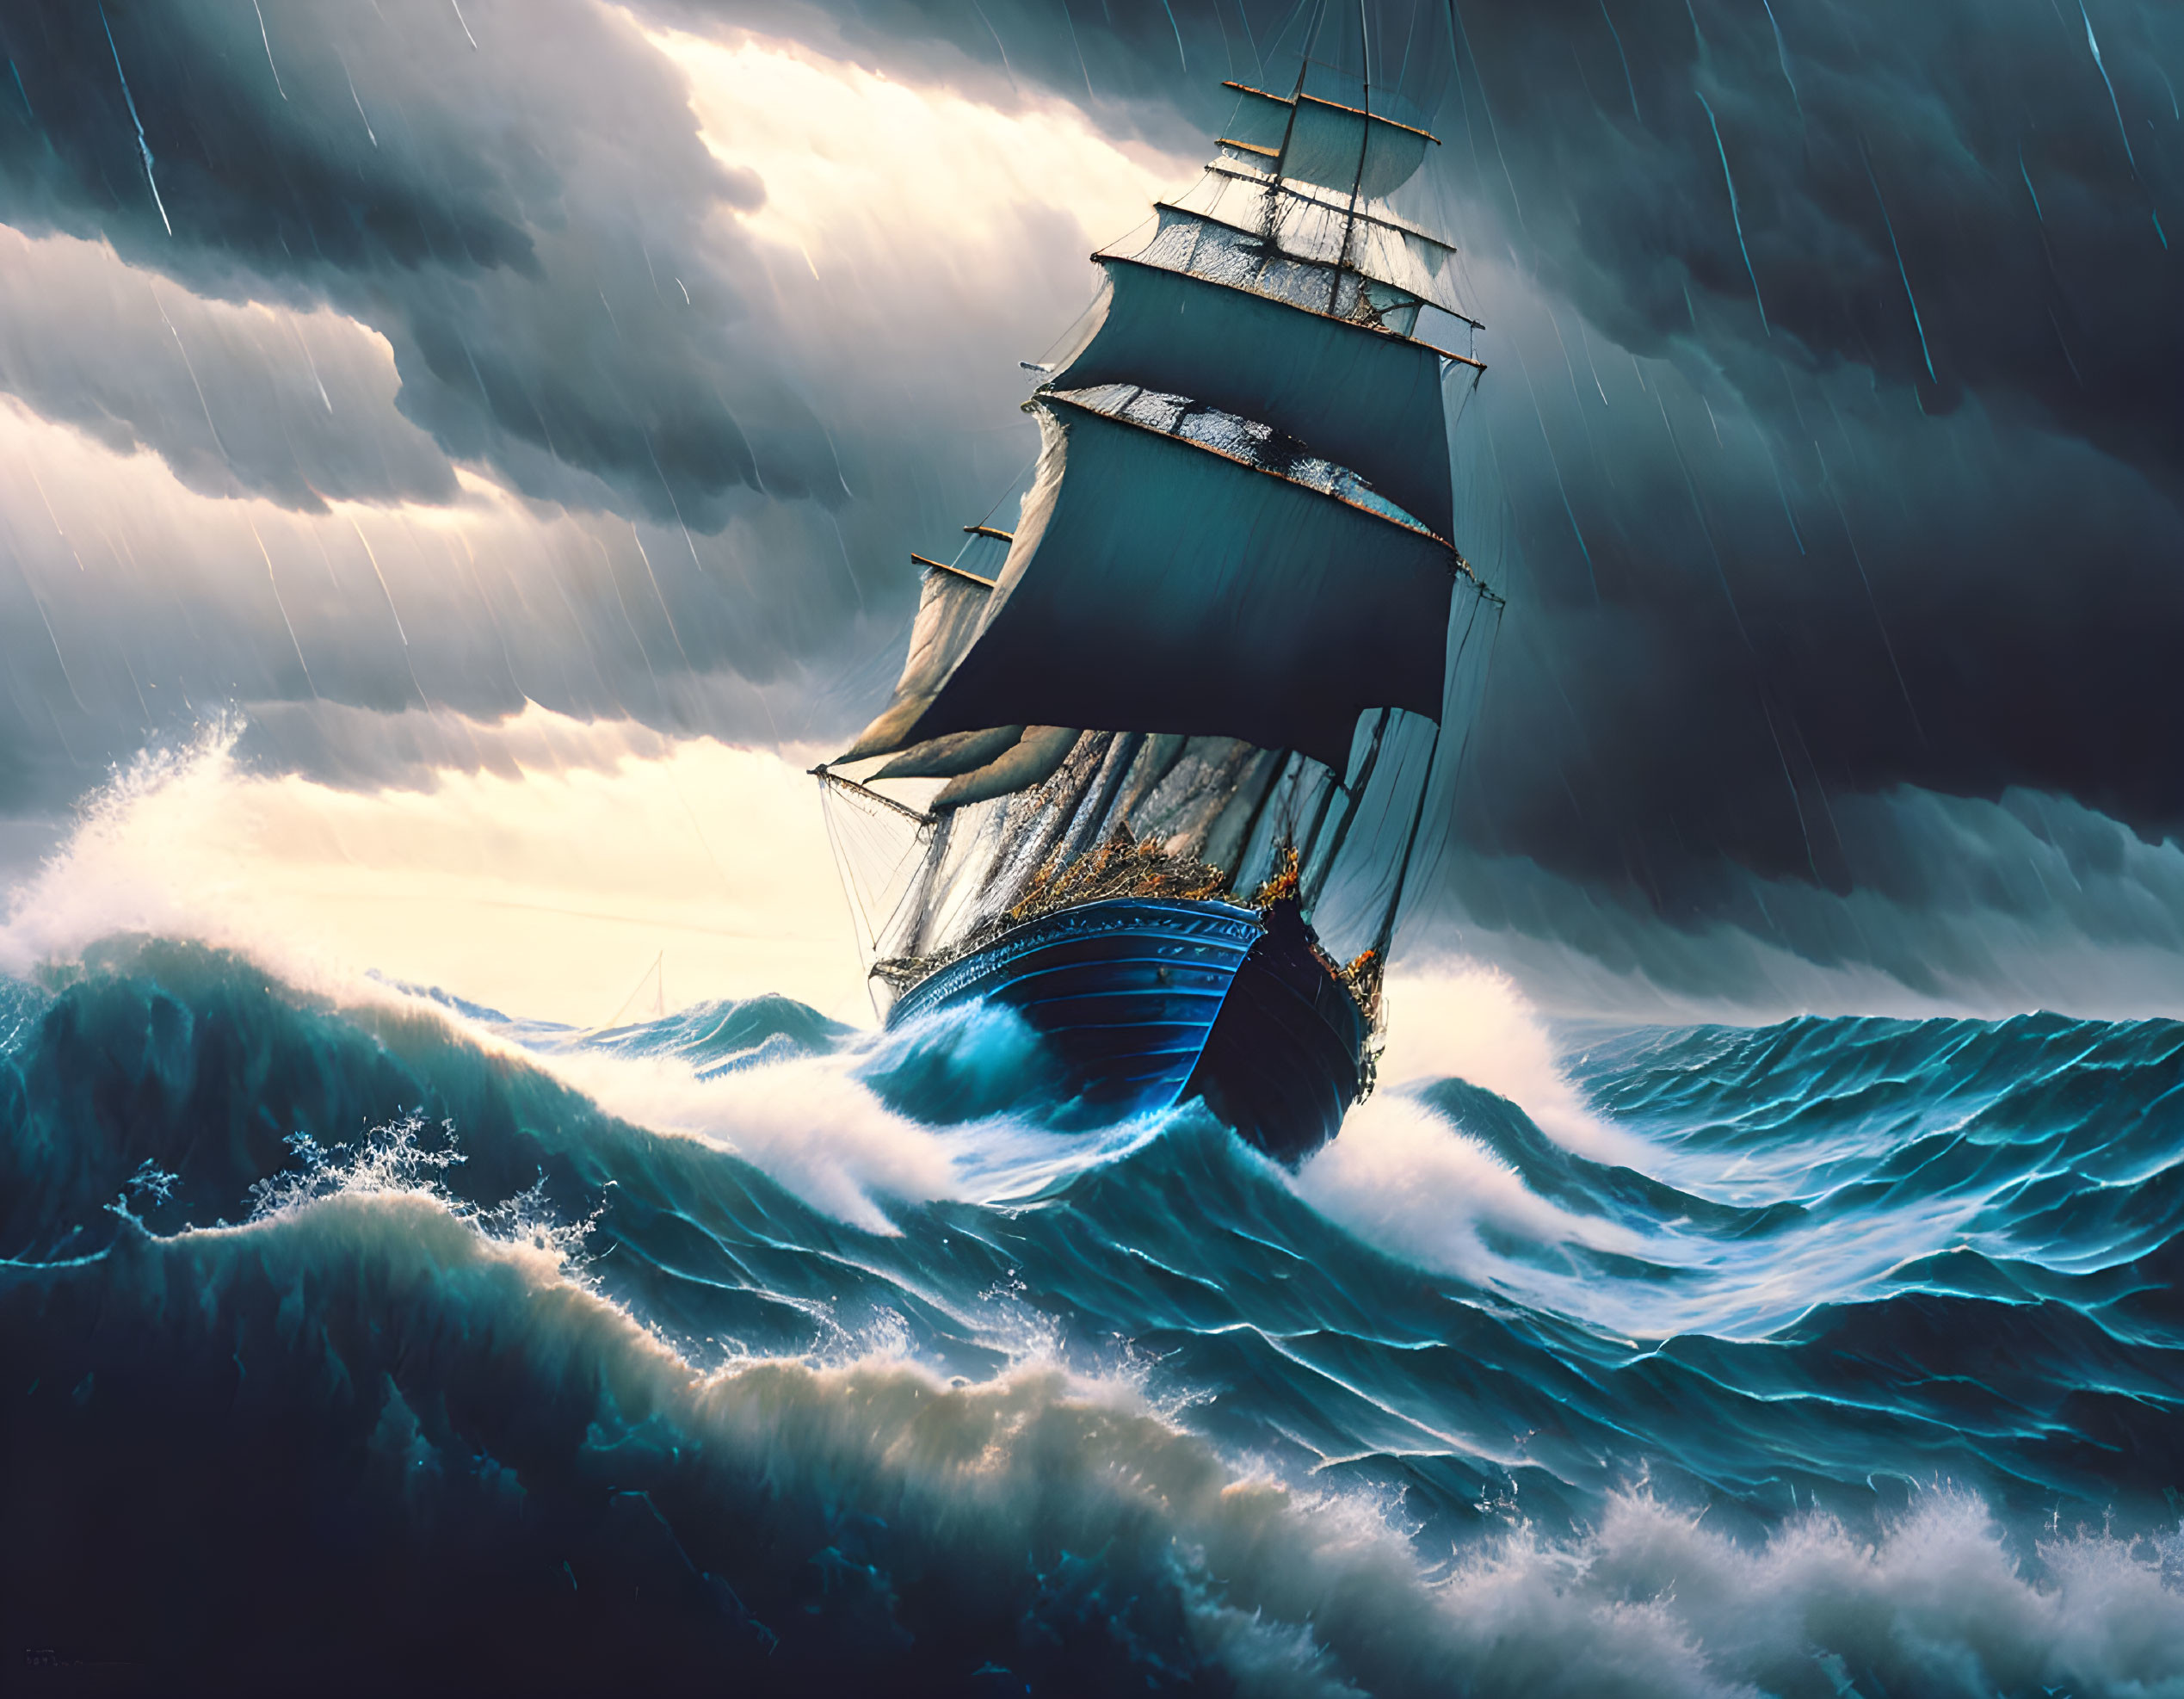  A huge old sailing ship in the stormy sea